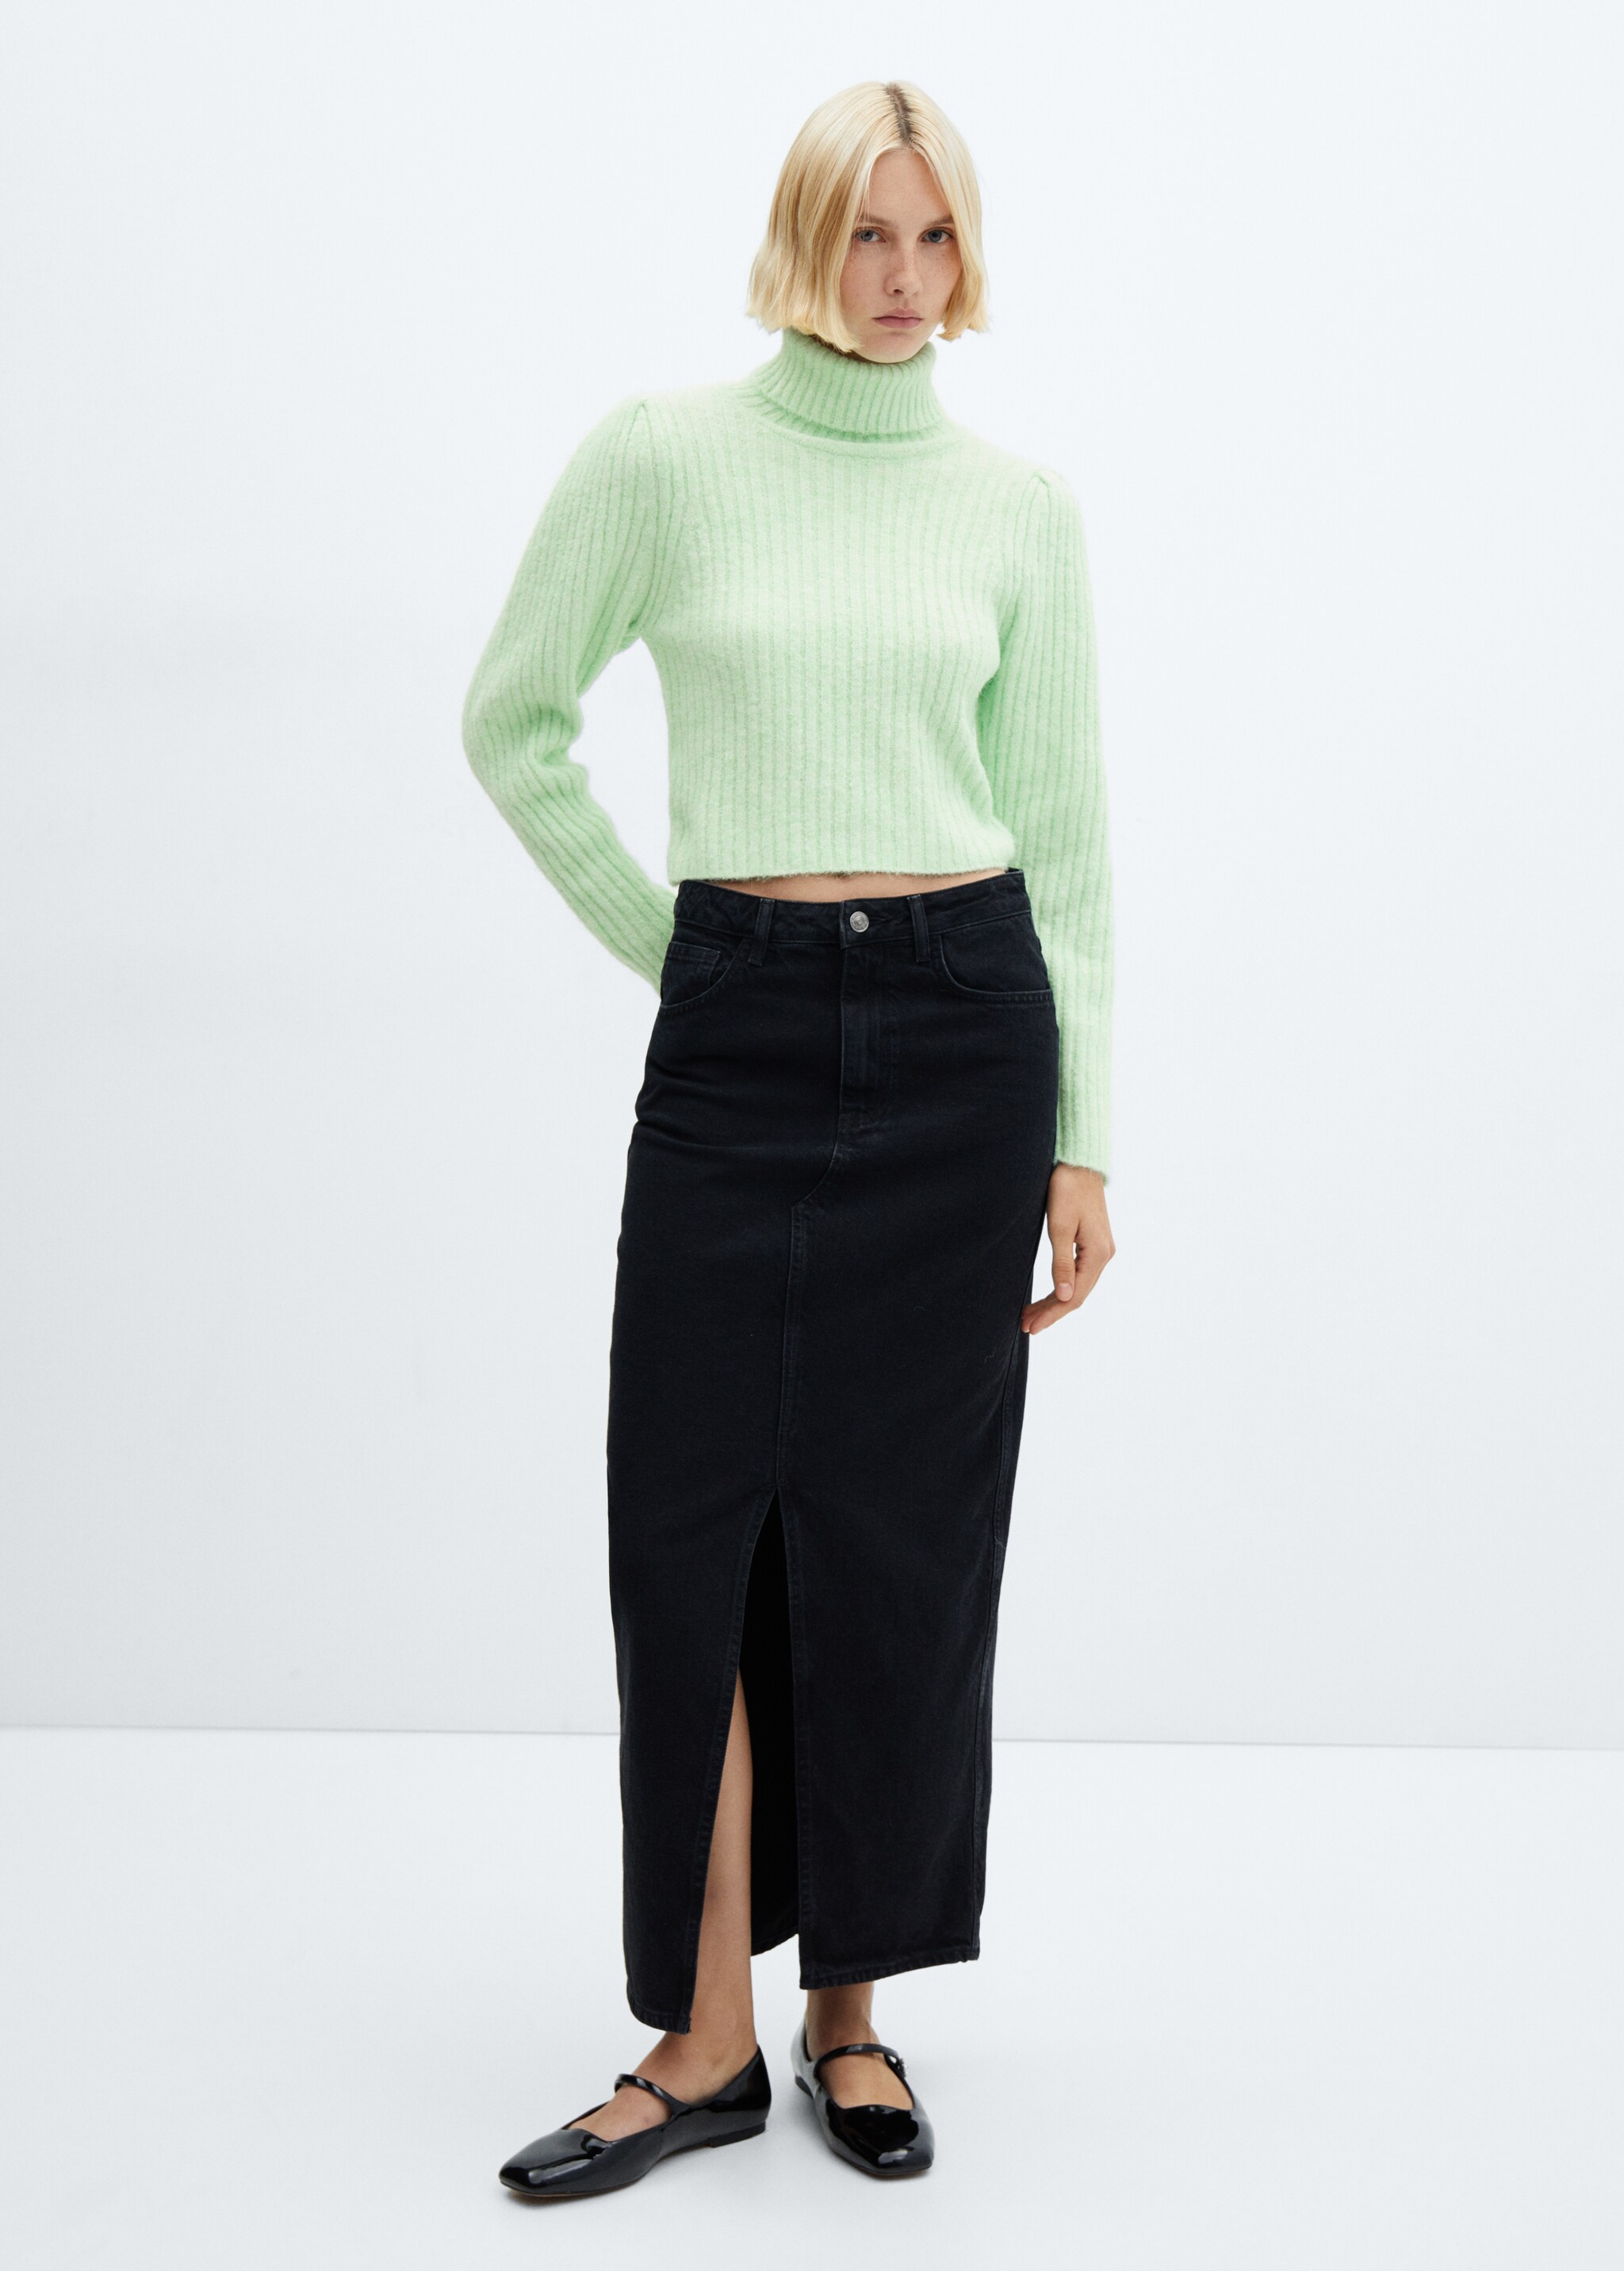 Turtleneck knitted sweater - General plane